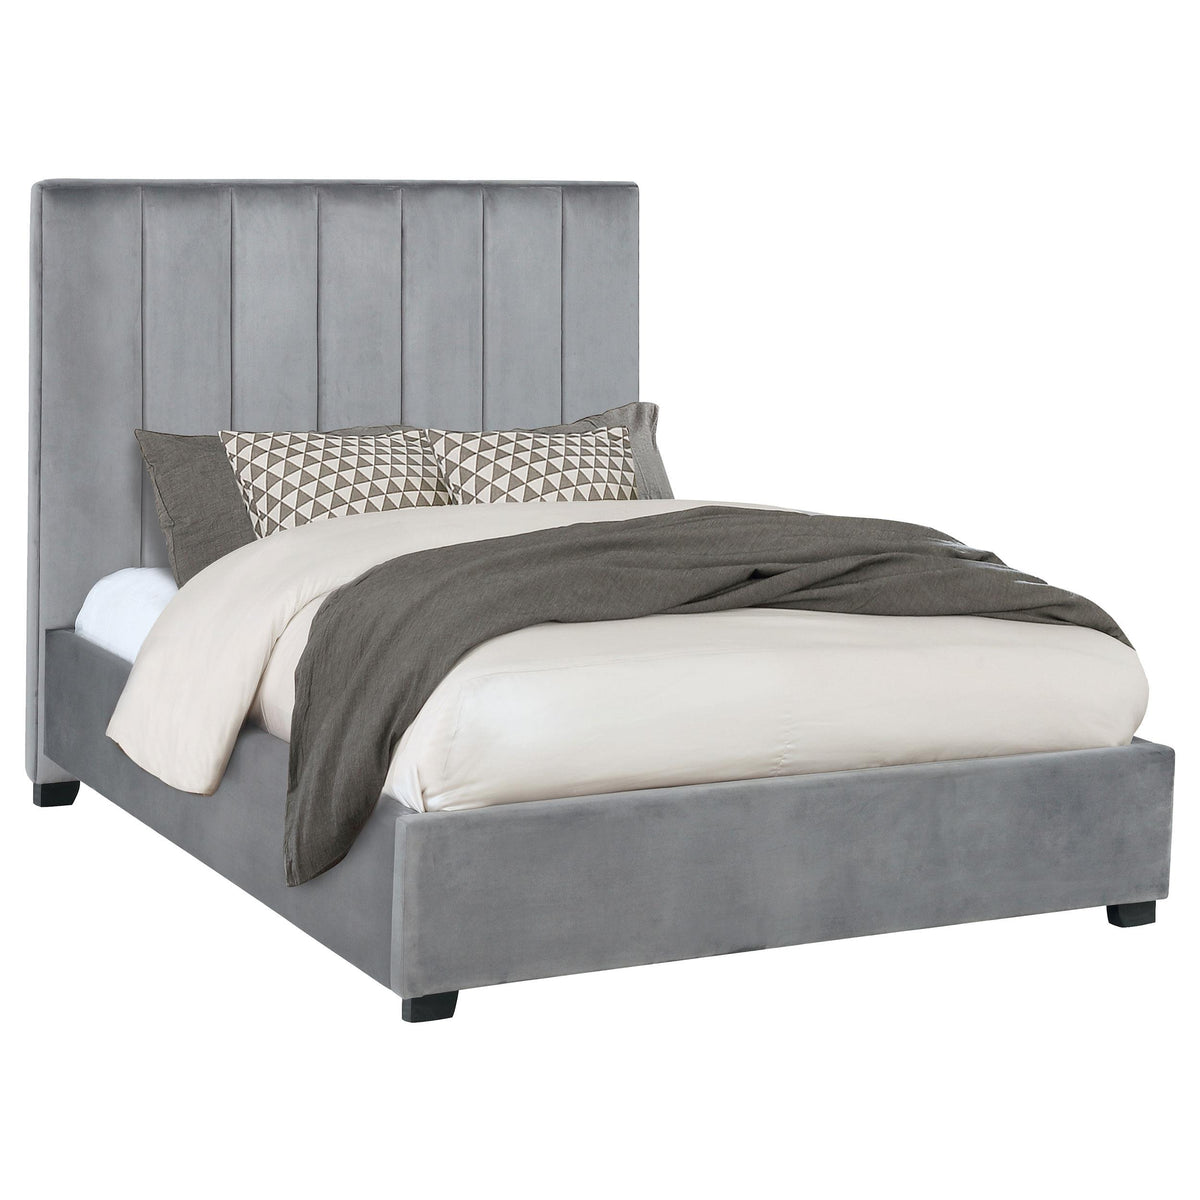 Arles Queen Vertical Channeled Tufted Bed Grey Arles Queen Vertical Channeled Tufted Bed Grey Half Price Furniture